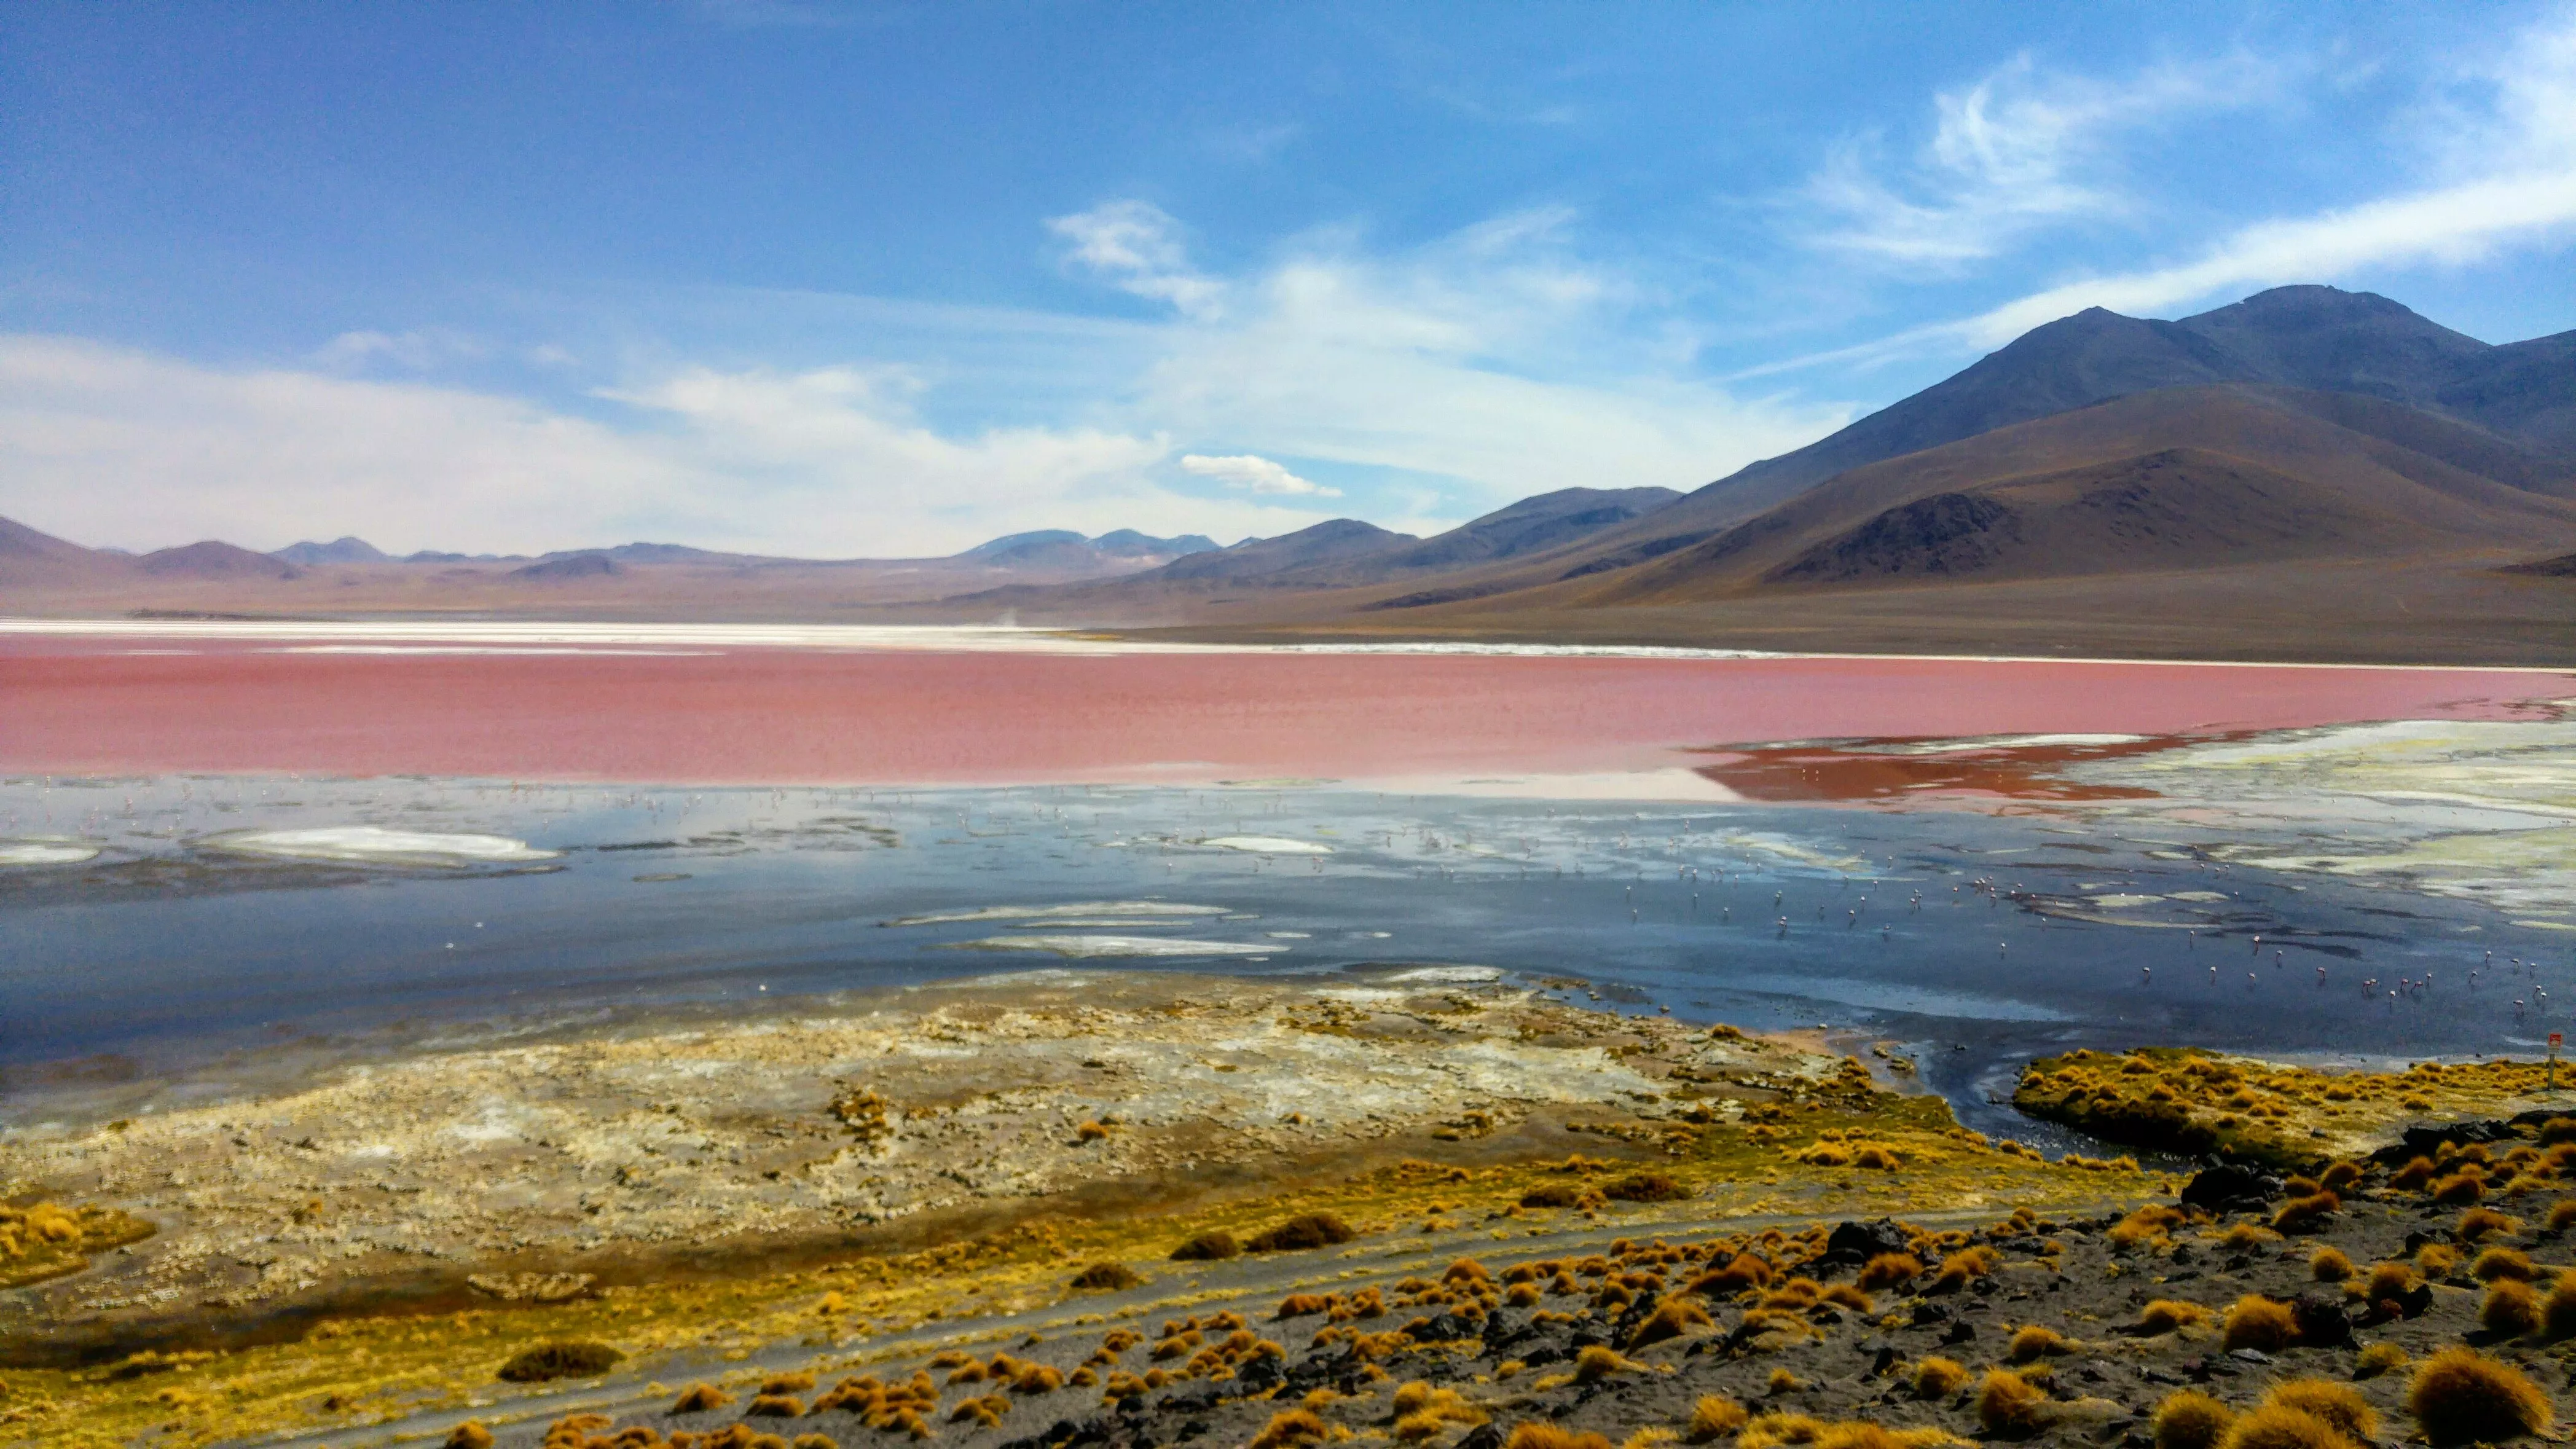 Lagoon Colorado in Bolivia, South America | Lakes - Rated 3.9